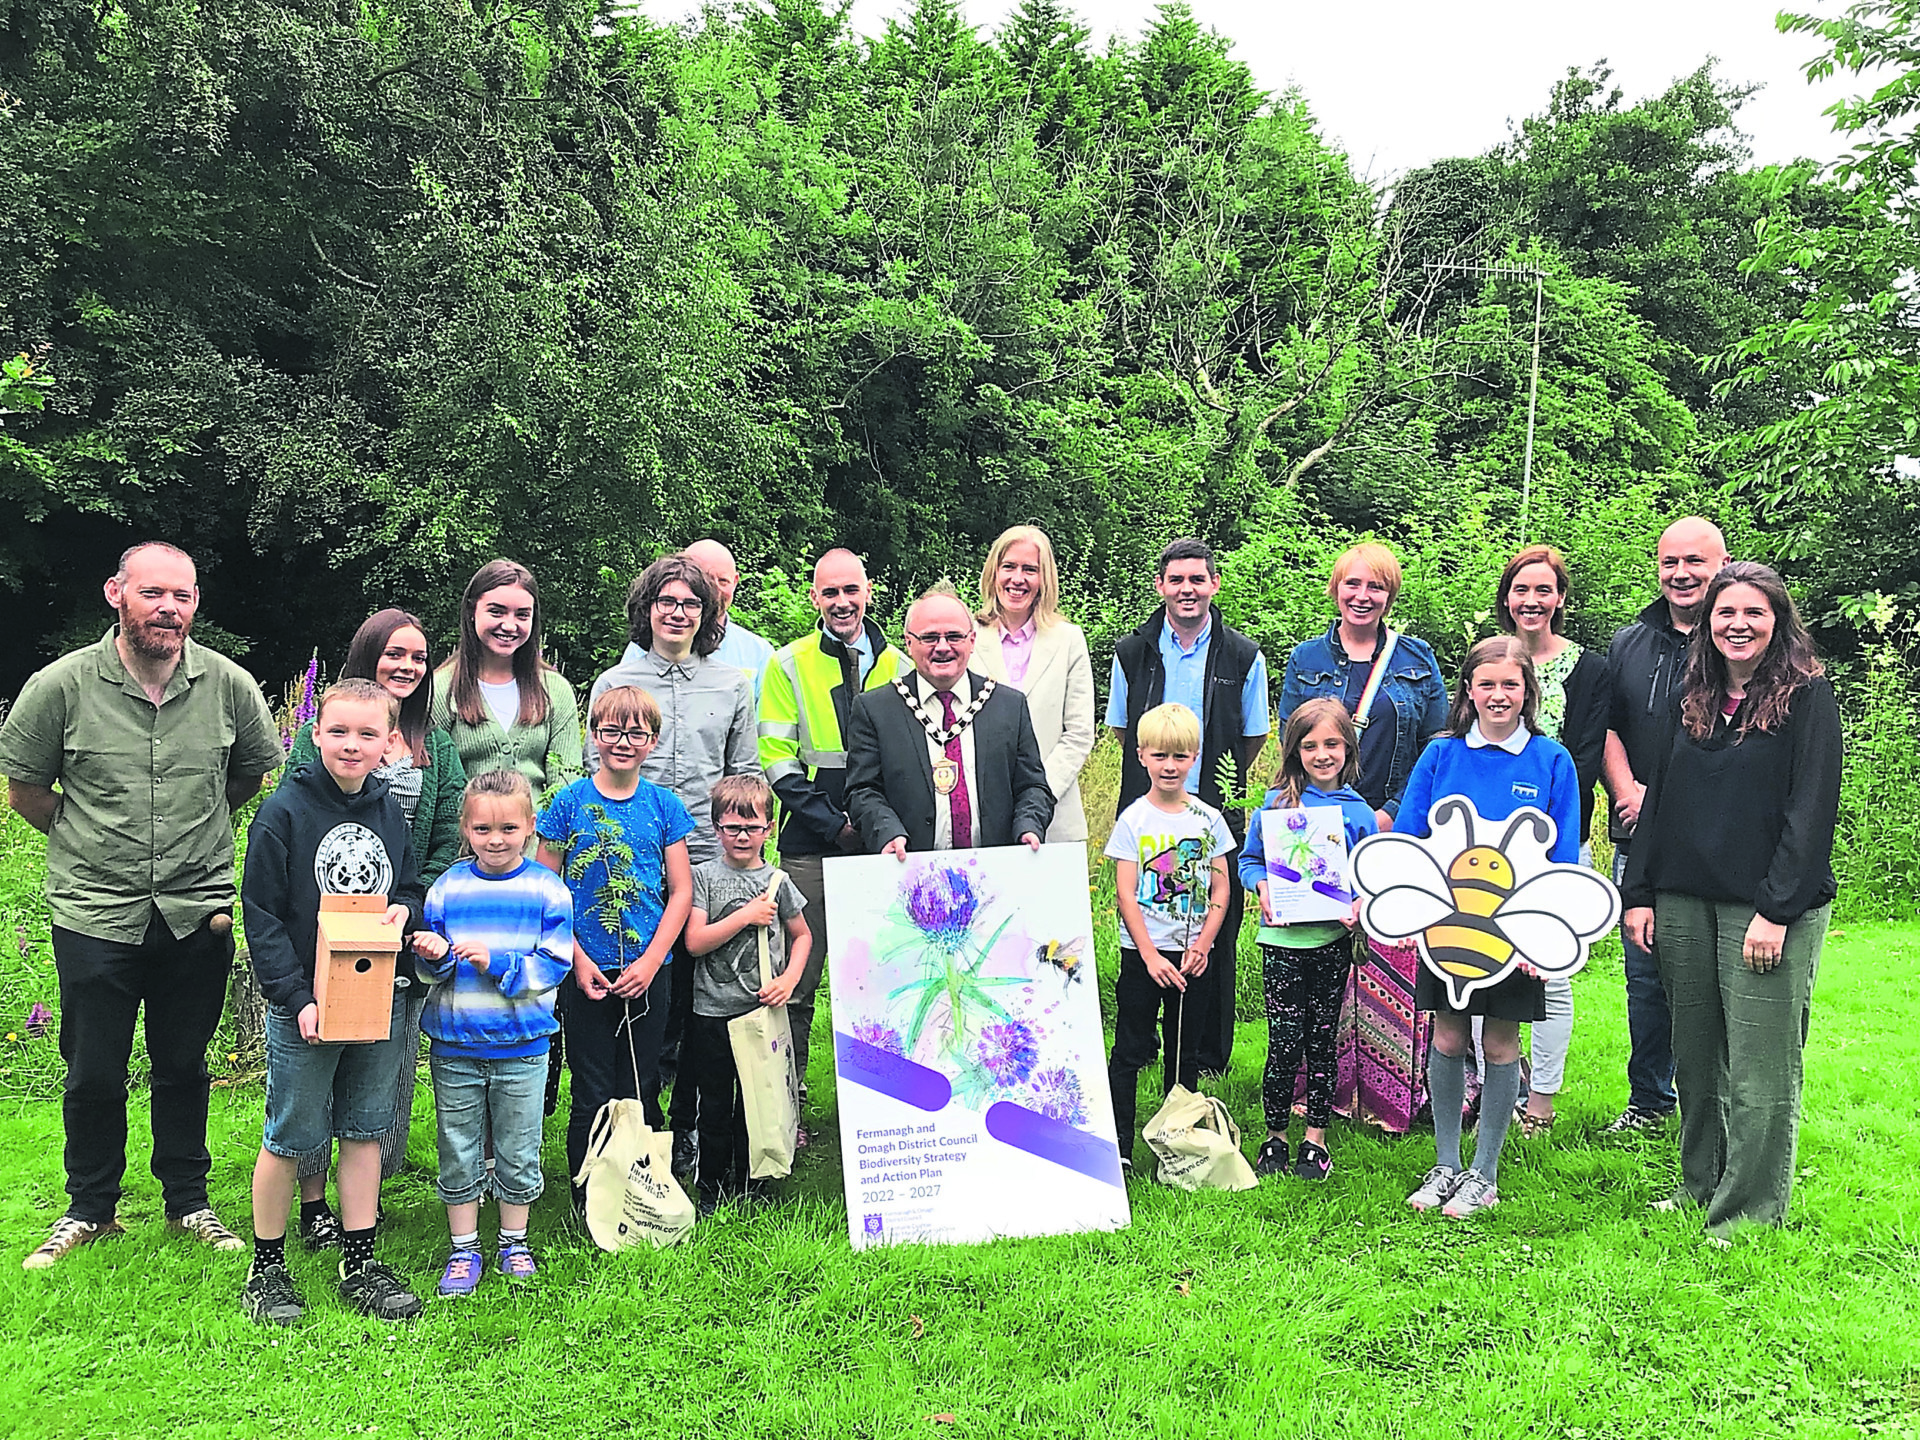 Local council launches new biodiversity strategy